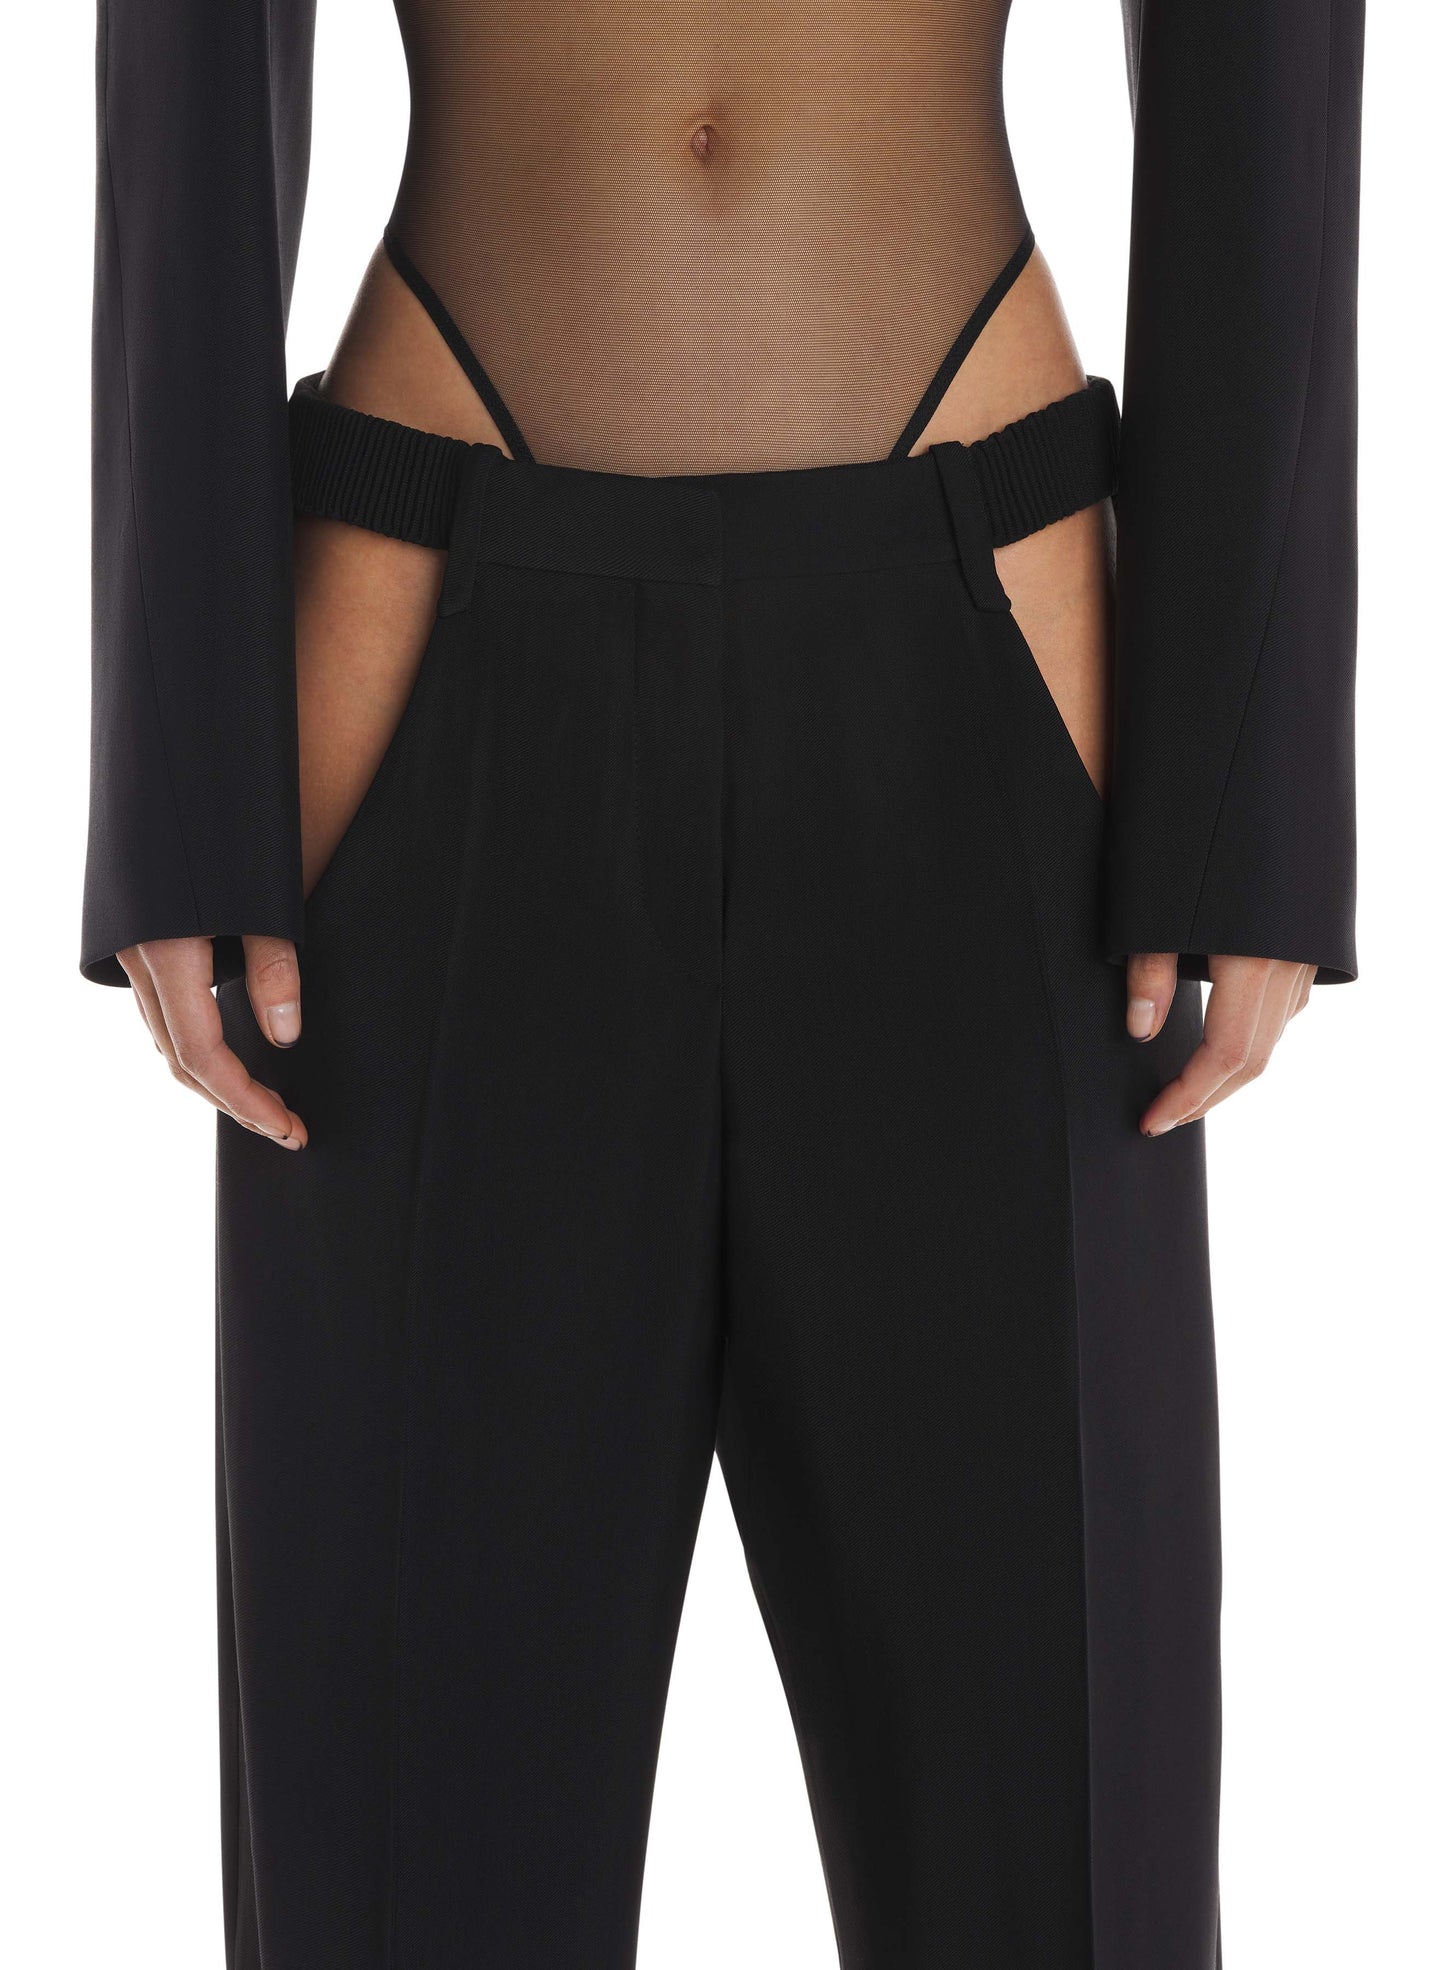 Cut-out trousers